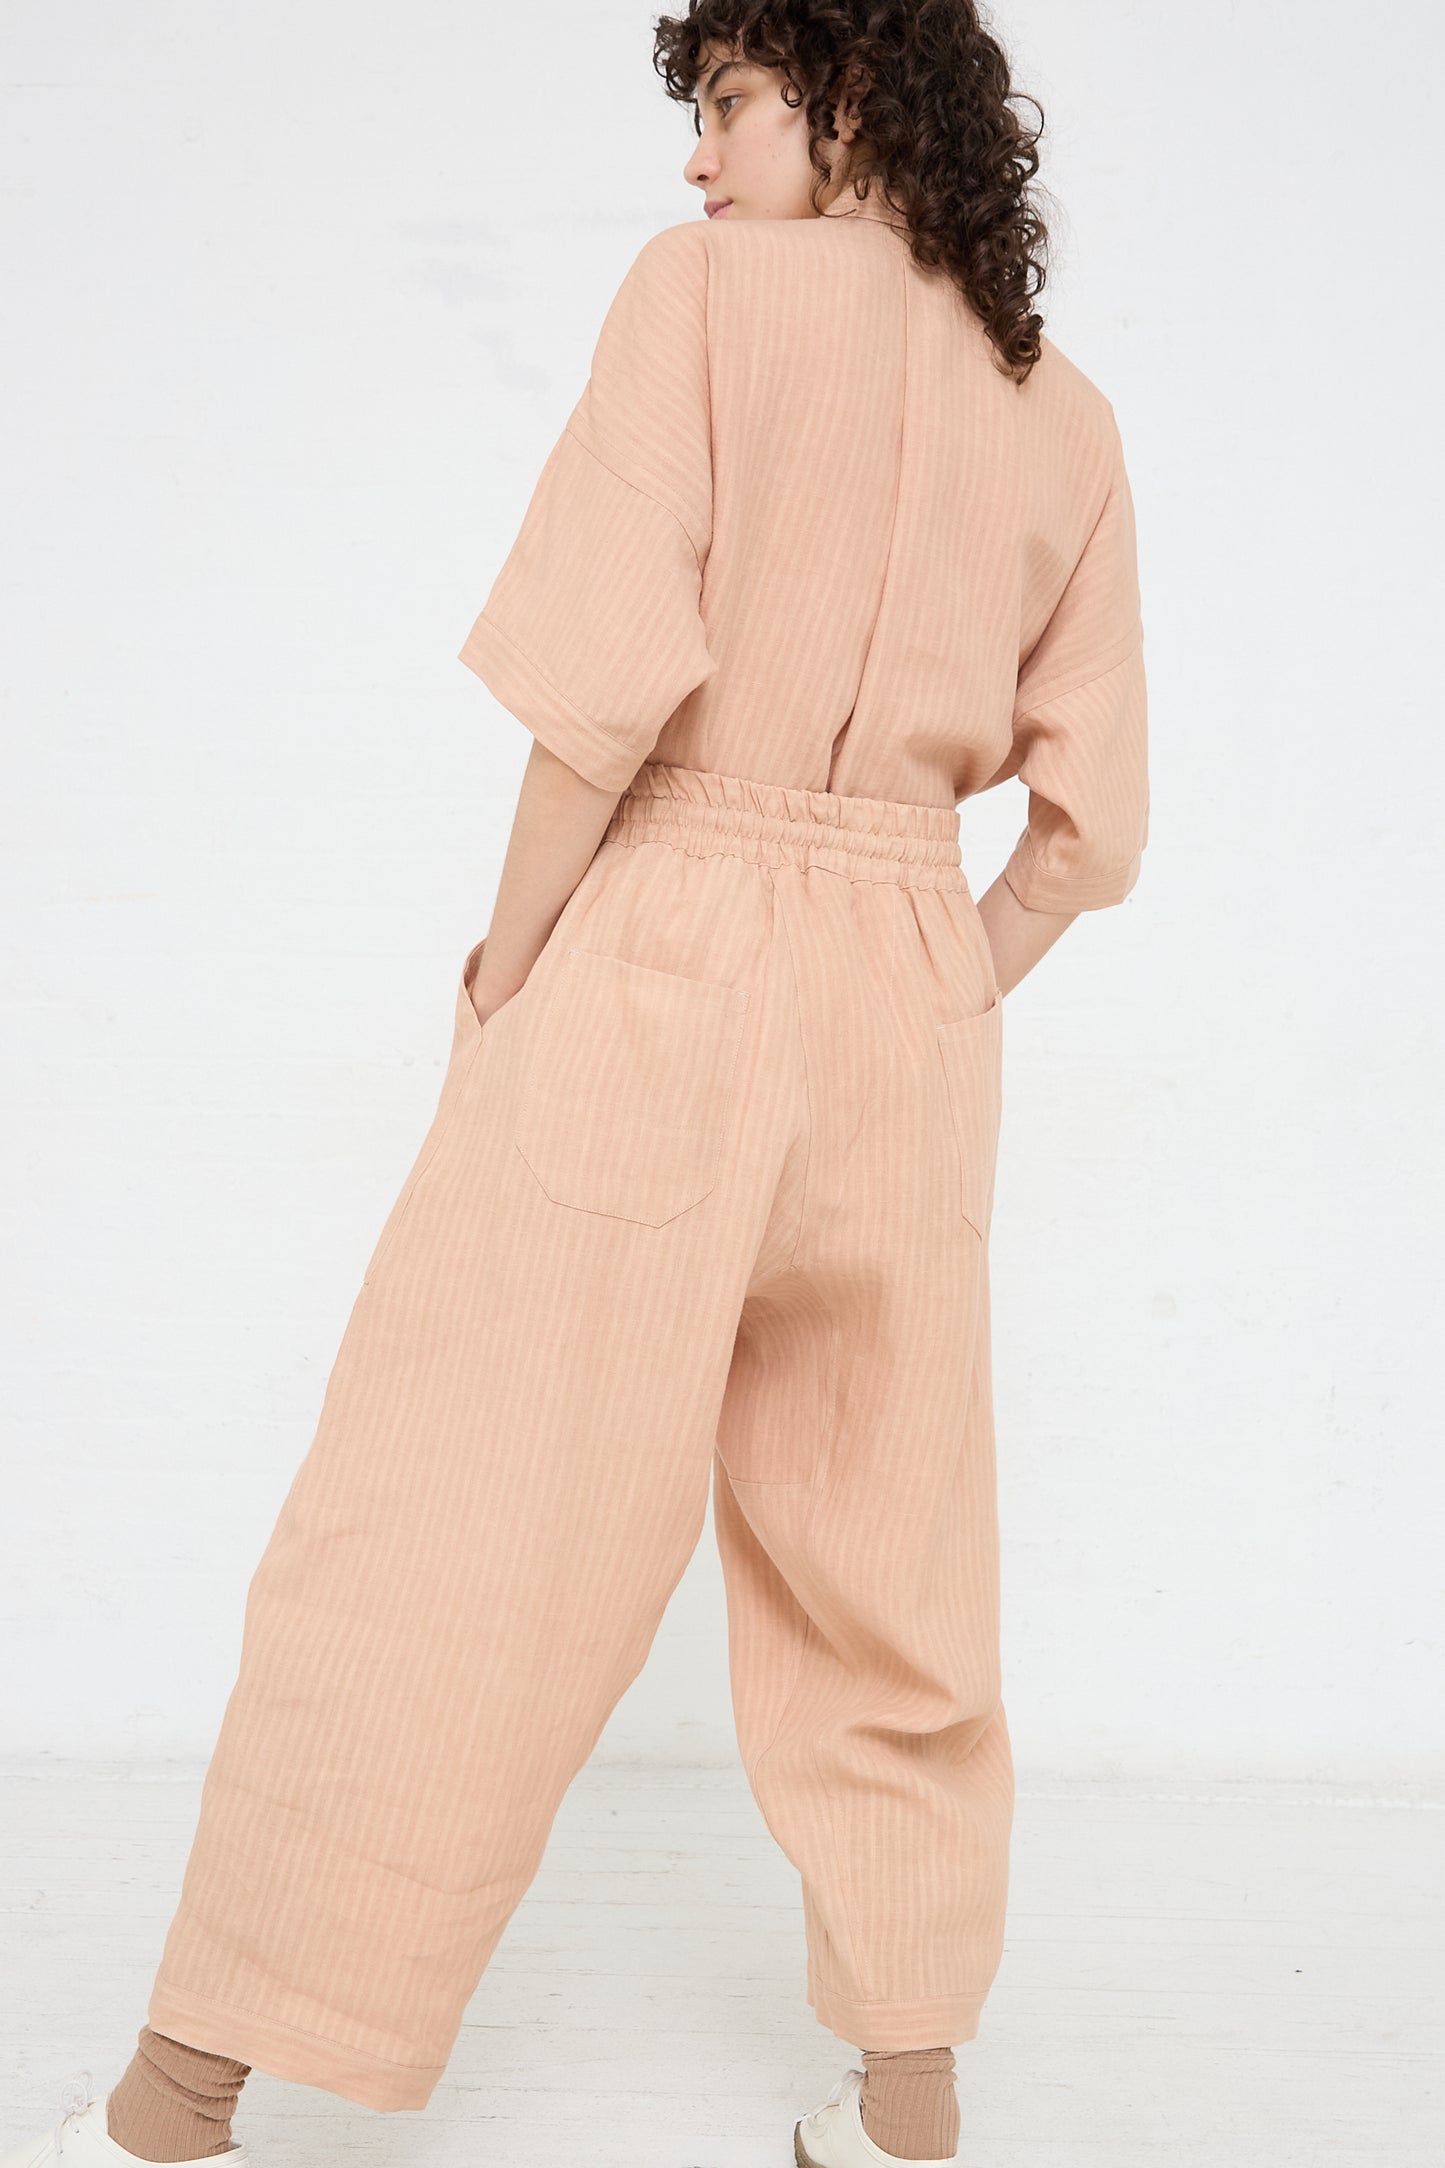 The model is wearing a woven linen trouser in Ume (Pink) by Jan-Jan Van Essche. Full length and back view.